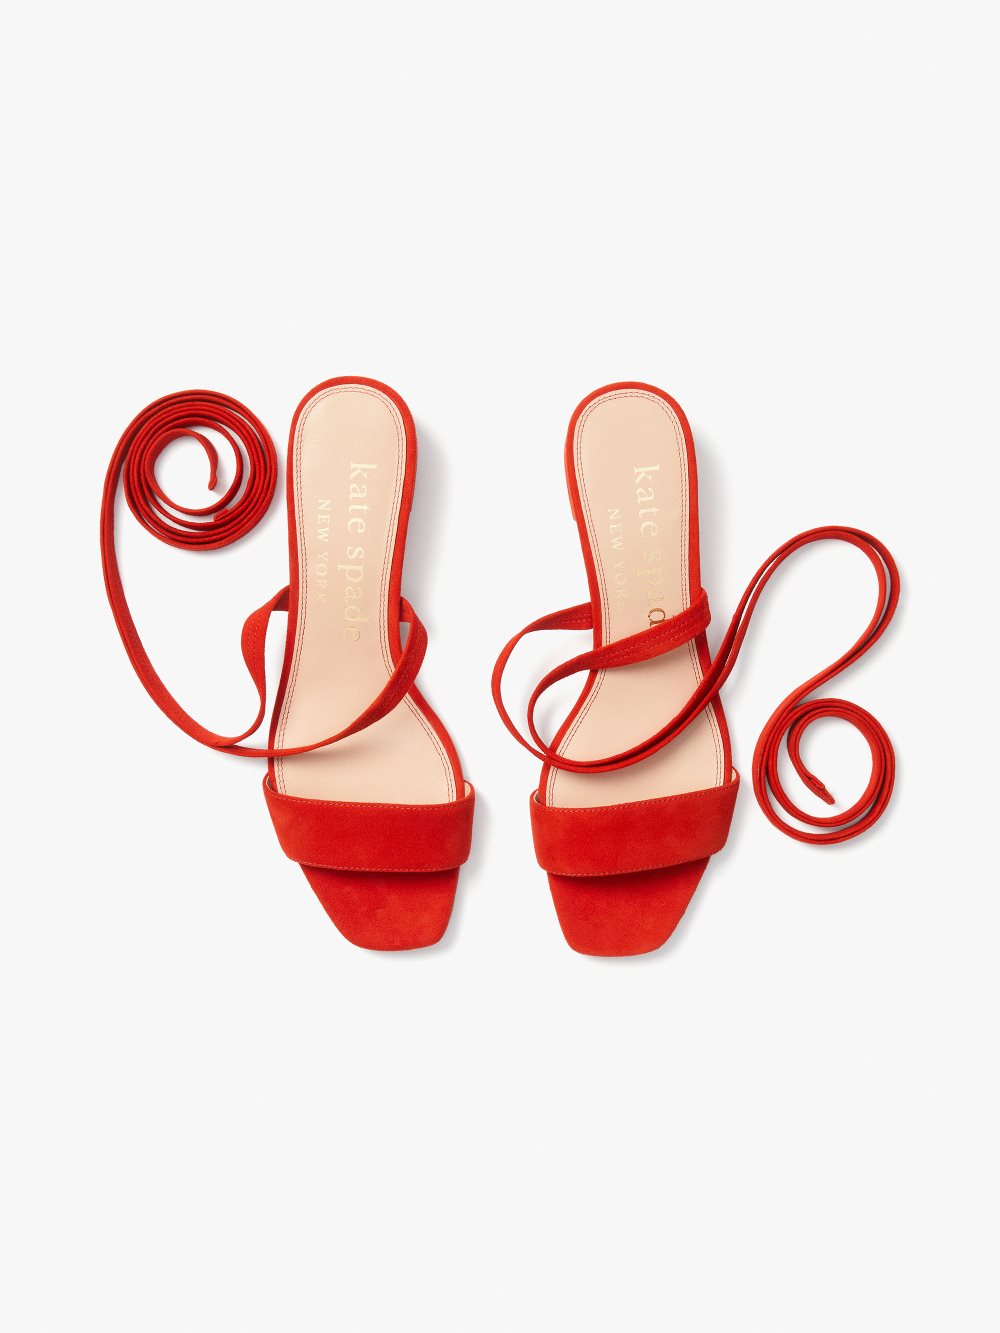 Women's bright red aphrodite sandals | Kate Spade